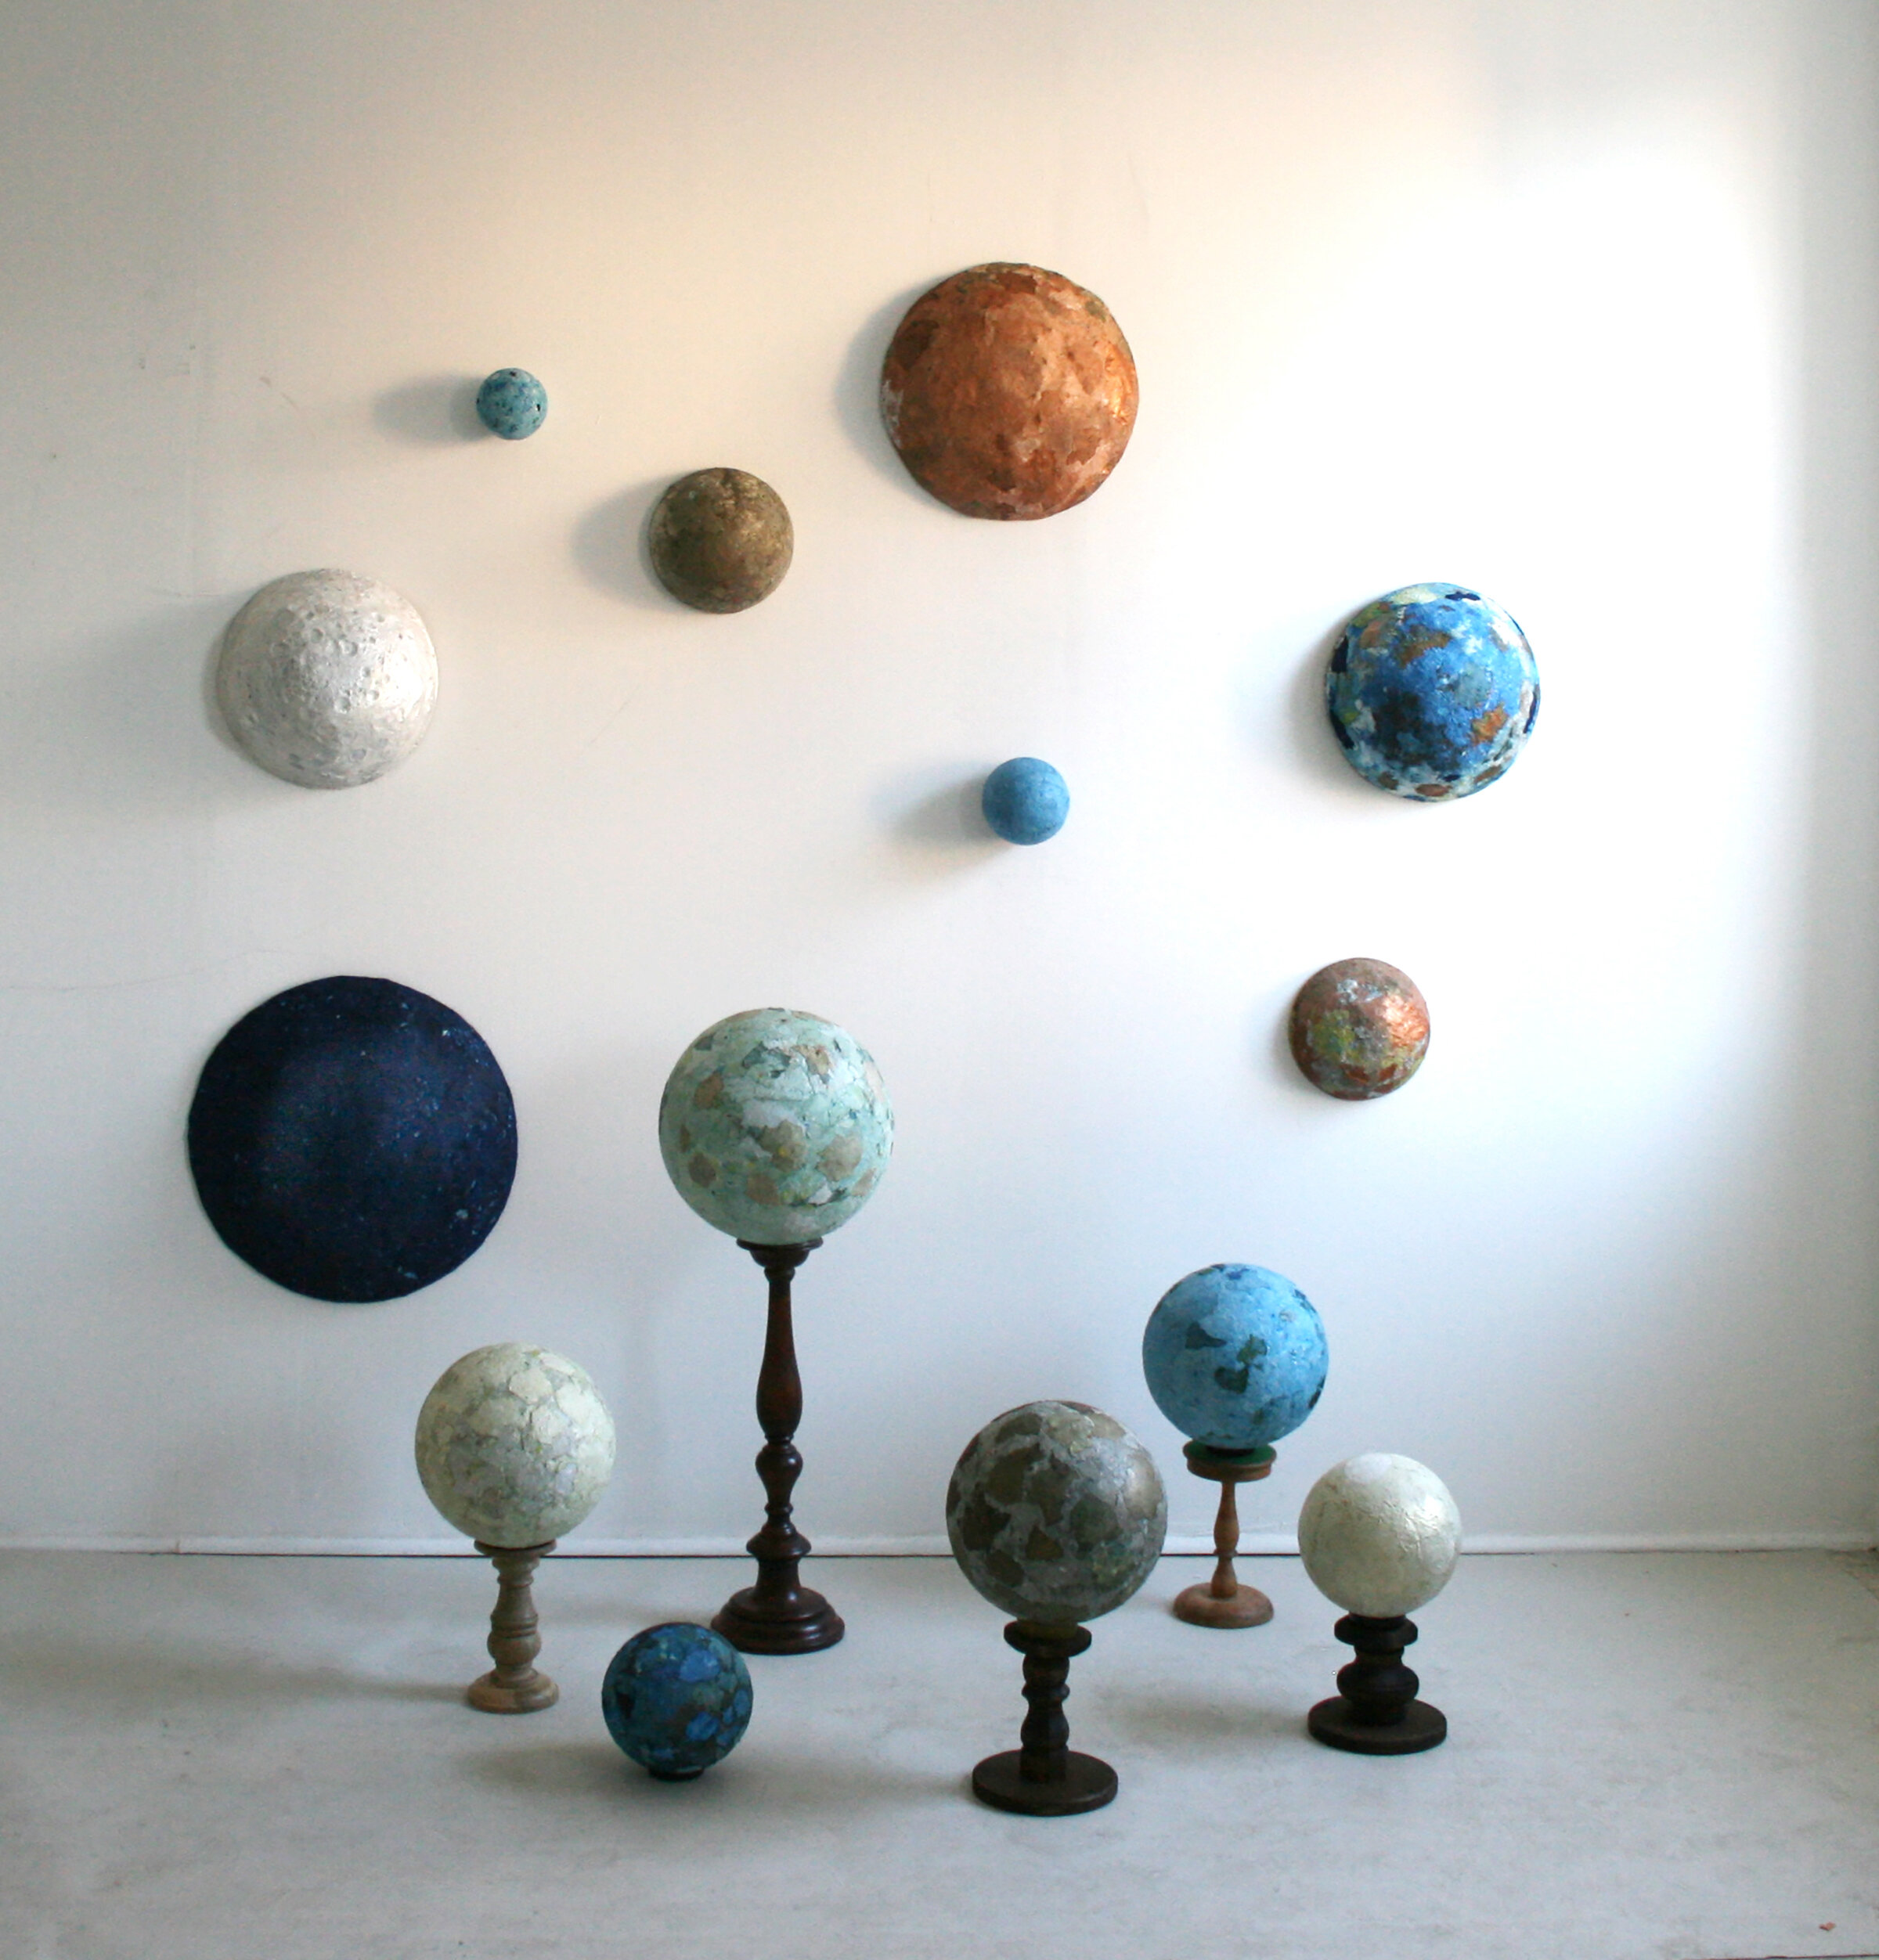  Possible Planets, H 72”, W 72”, D 46.5”, artist cast and pigmented Abaca/cotton and wood, 2021   